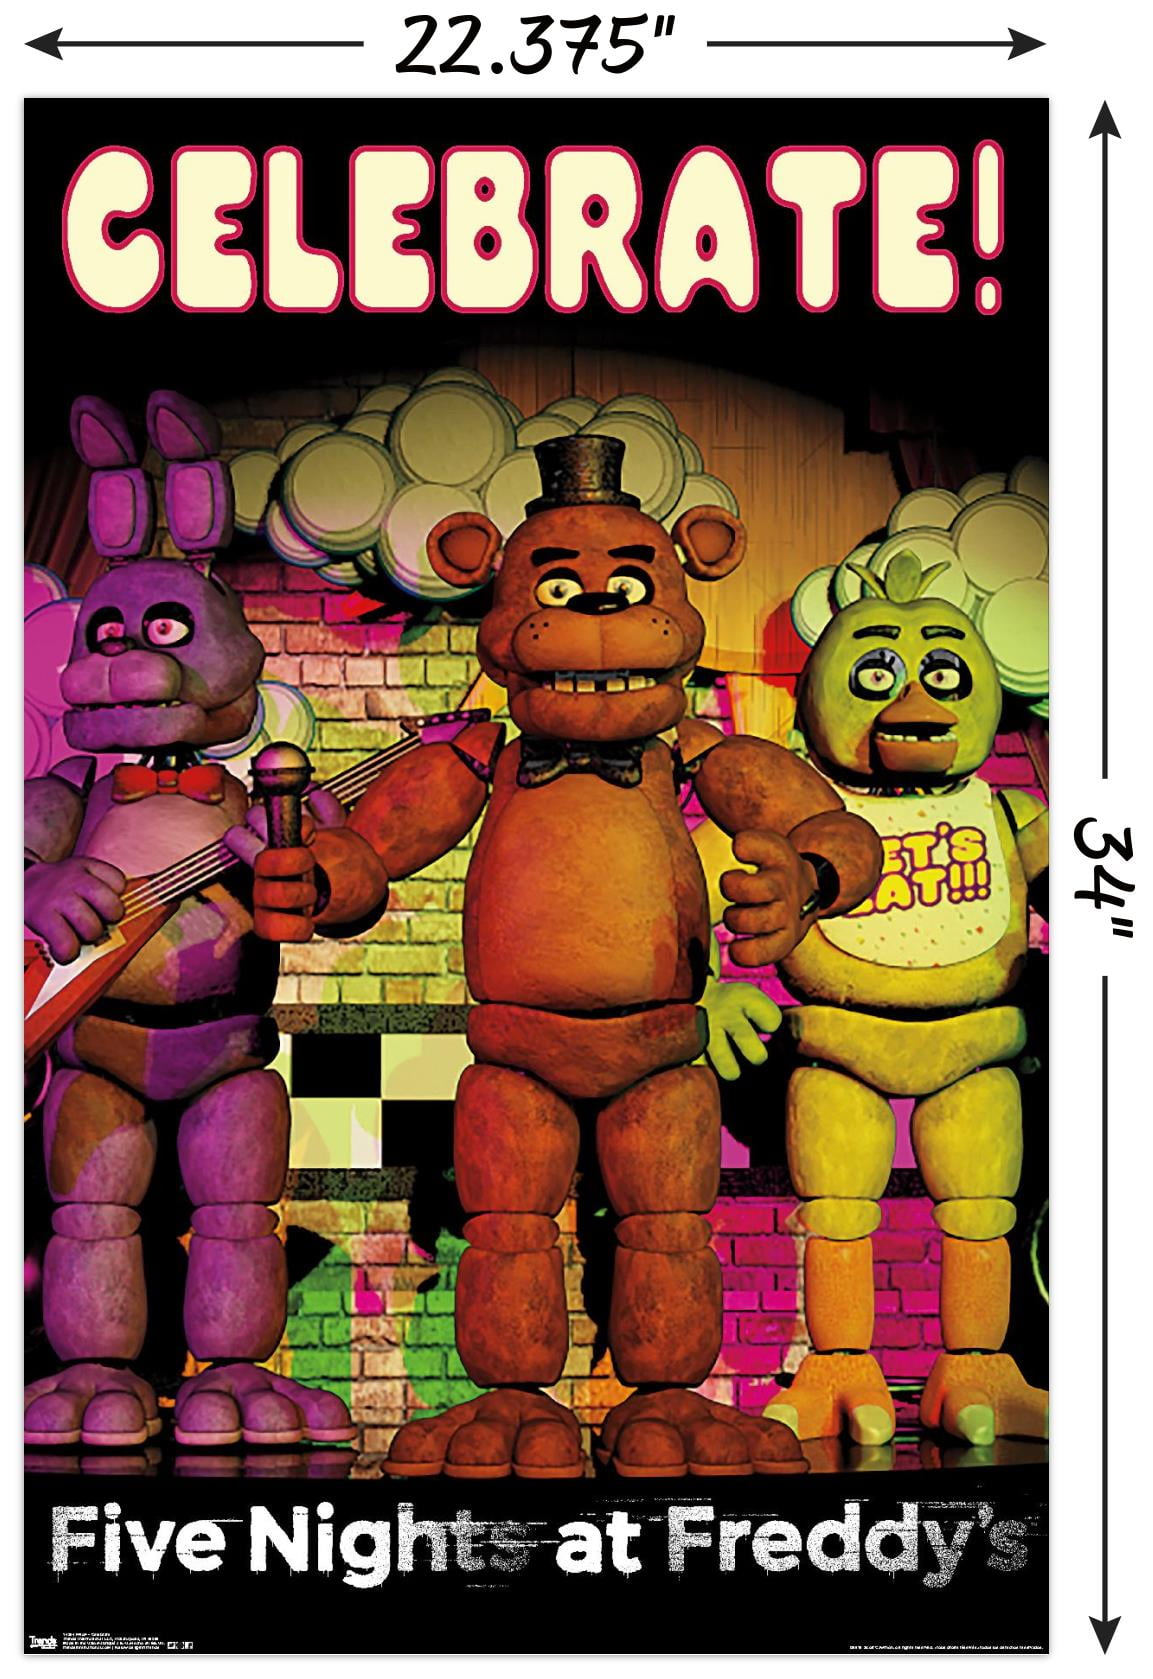 Five Nights at Freddy's Glow in the Dark Poster - 22.375 x 34